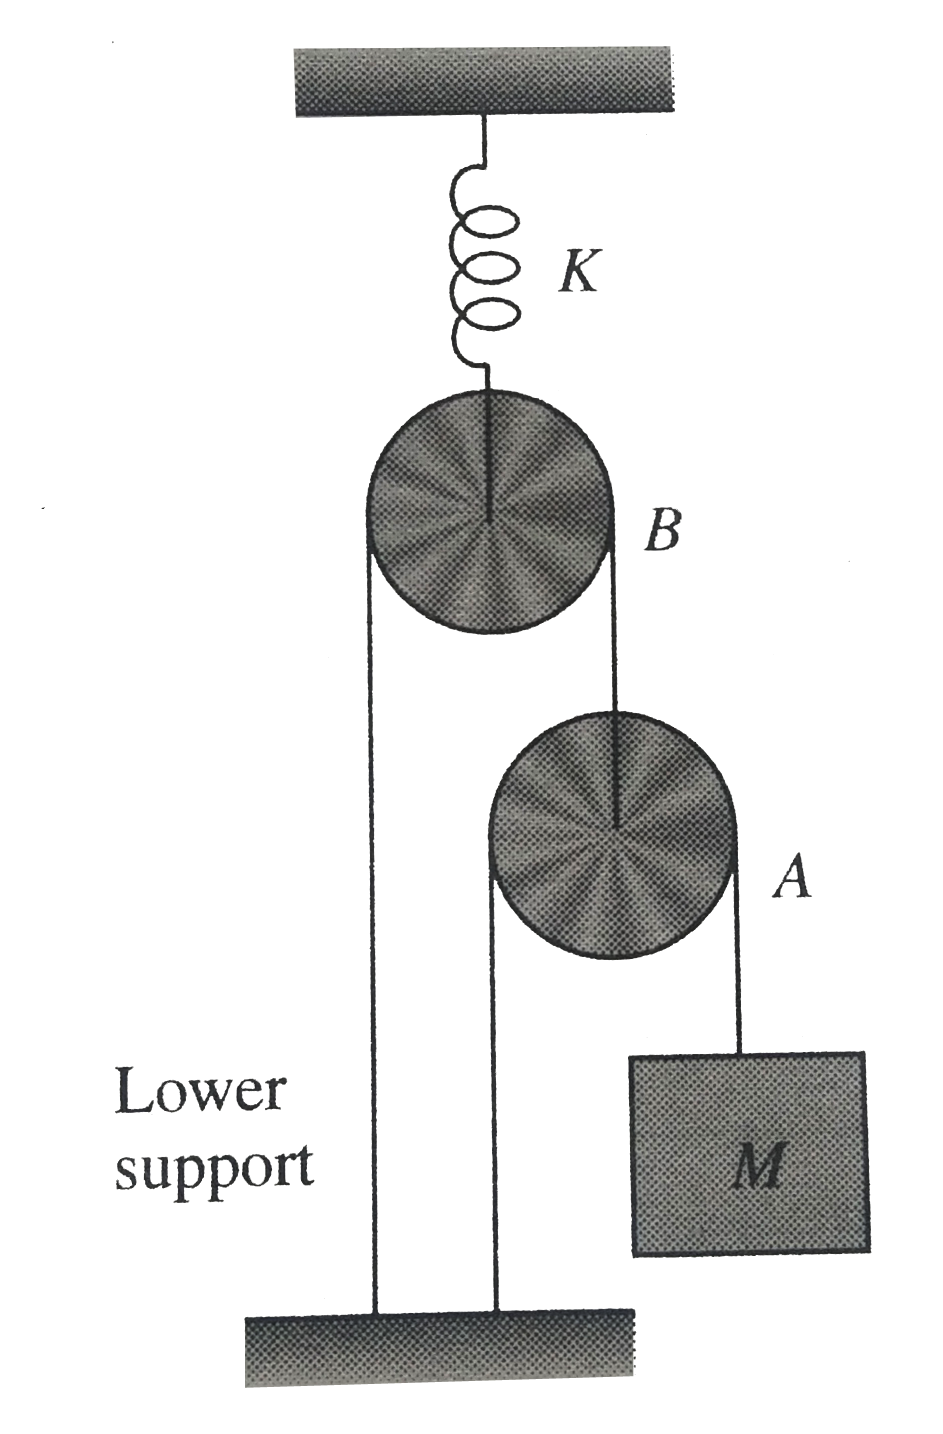 A mass M is suspended as shown in fig. The system is in equilibrium. Assume pulleys to be massless.  K is the force constant of the spring.        If each of the pullies A and B has mass M, then find the net tension force acting on the lower support. Asumme pulleys to be frictionaless.